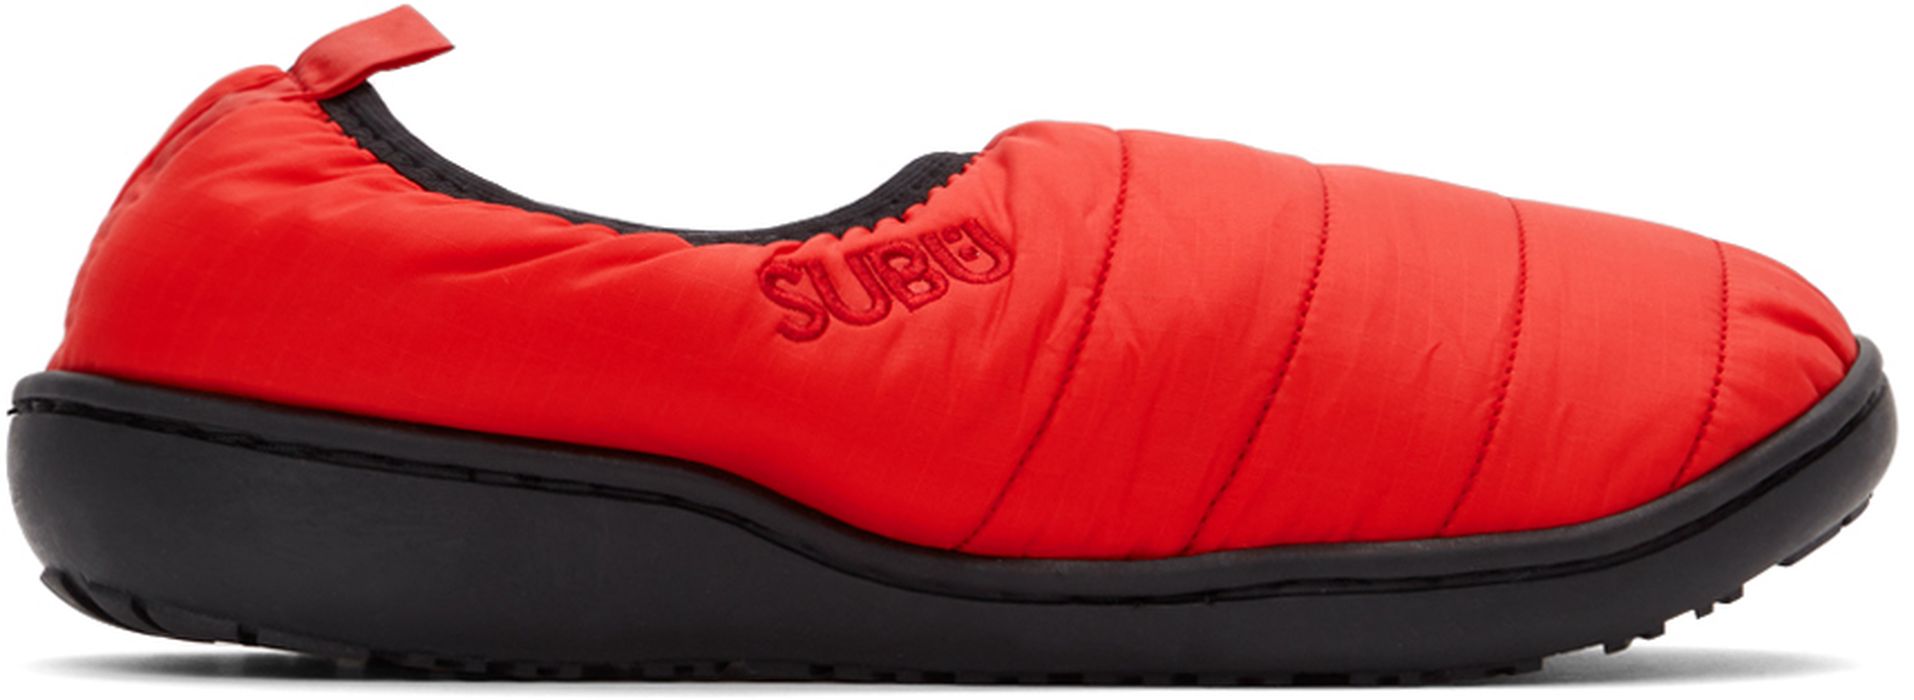 SUBU Red Quilted Packable Slippers